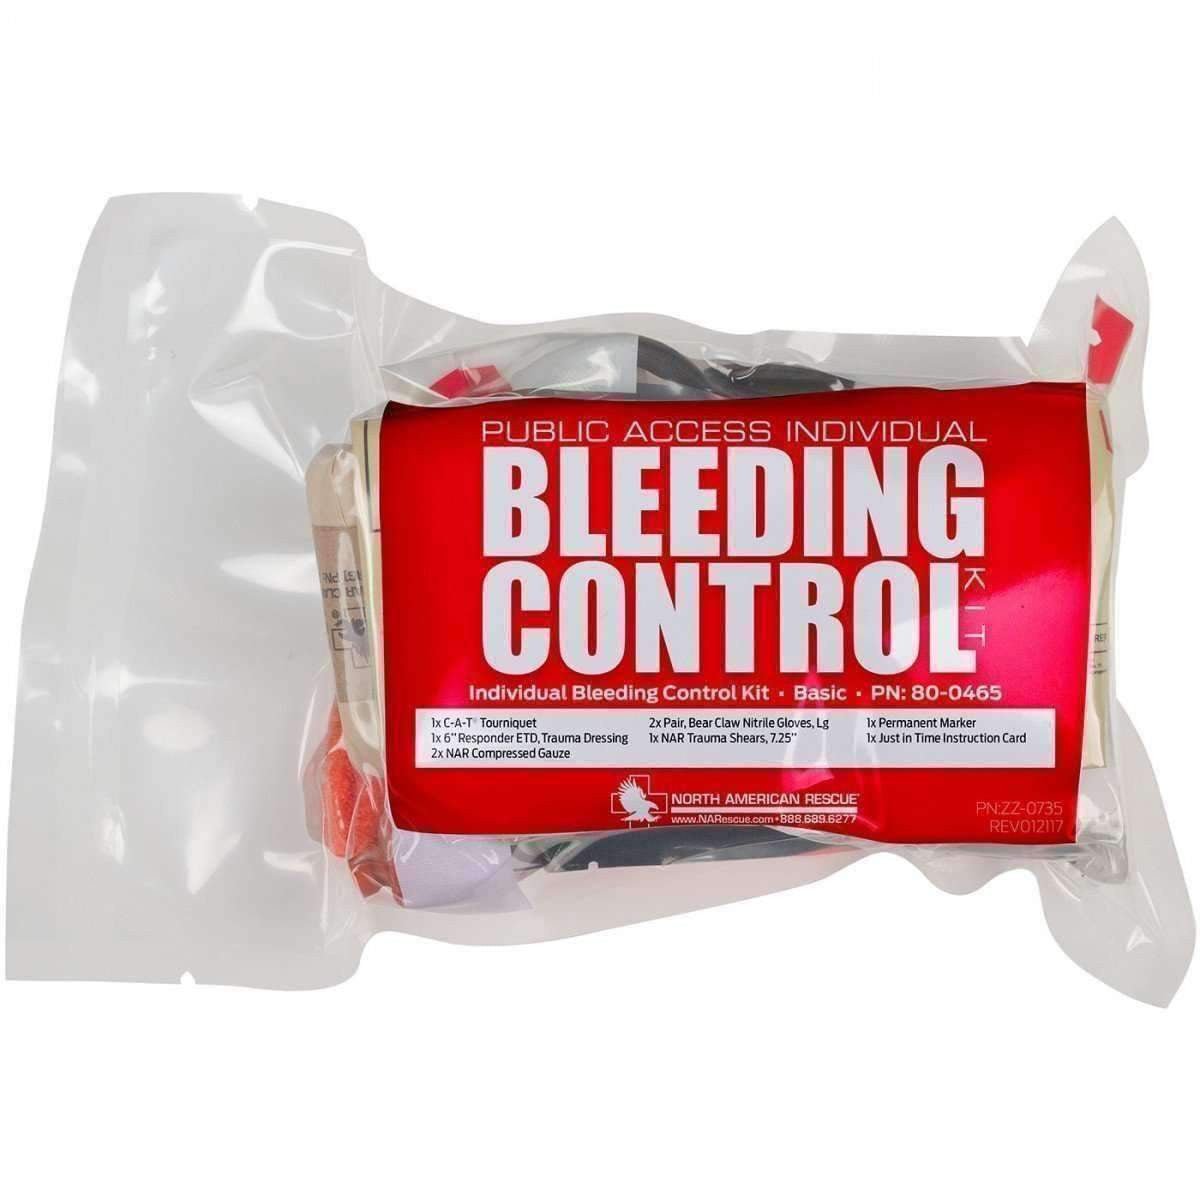 Public Access INDIVIDUAL Bleeding Control Kit - Vacuum Sealed - MED-TAC International Corp. - North American Rescue